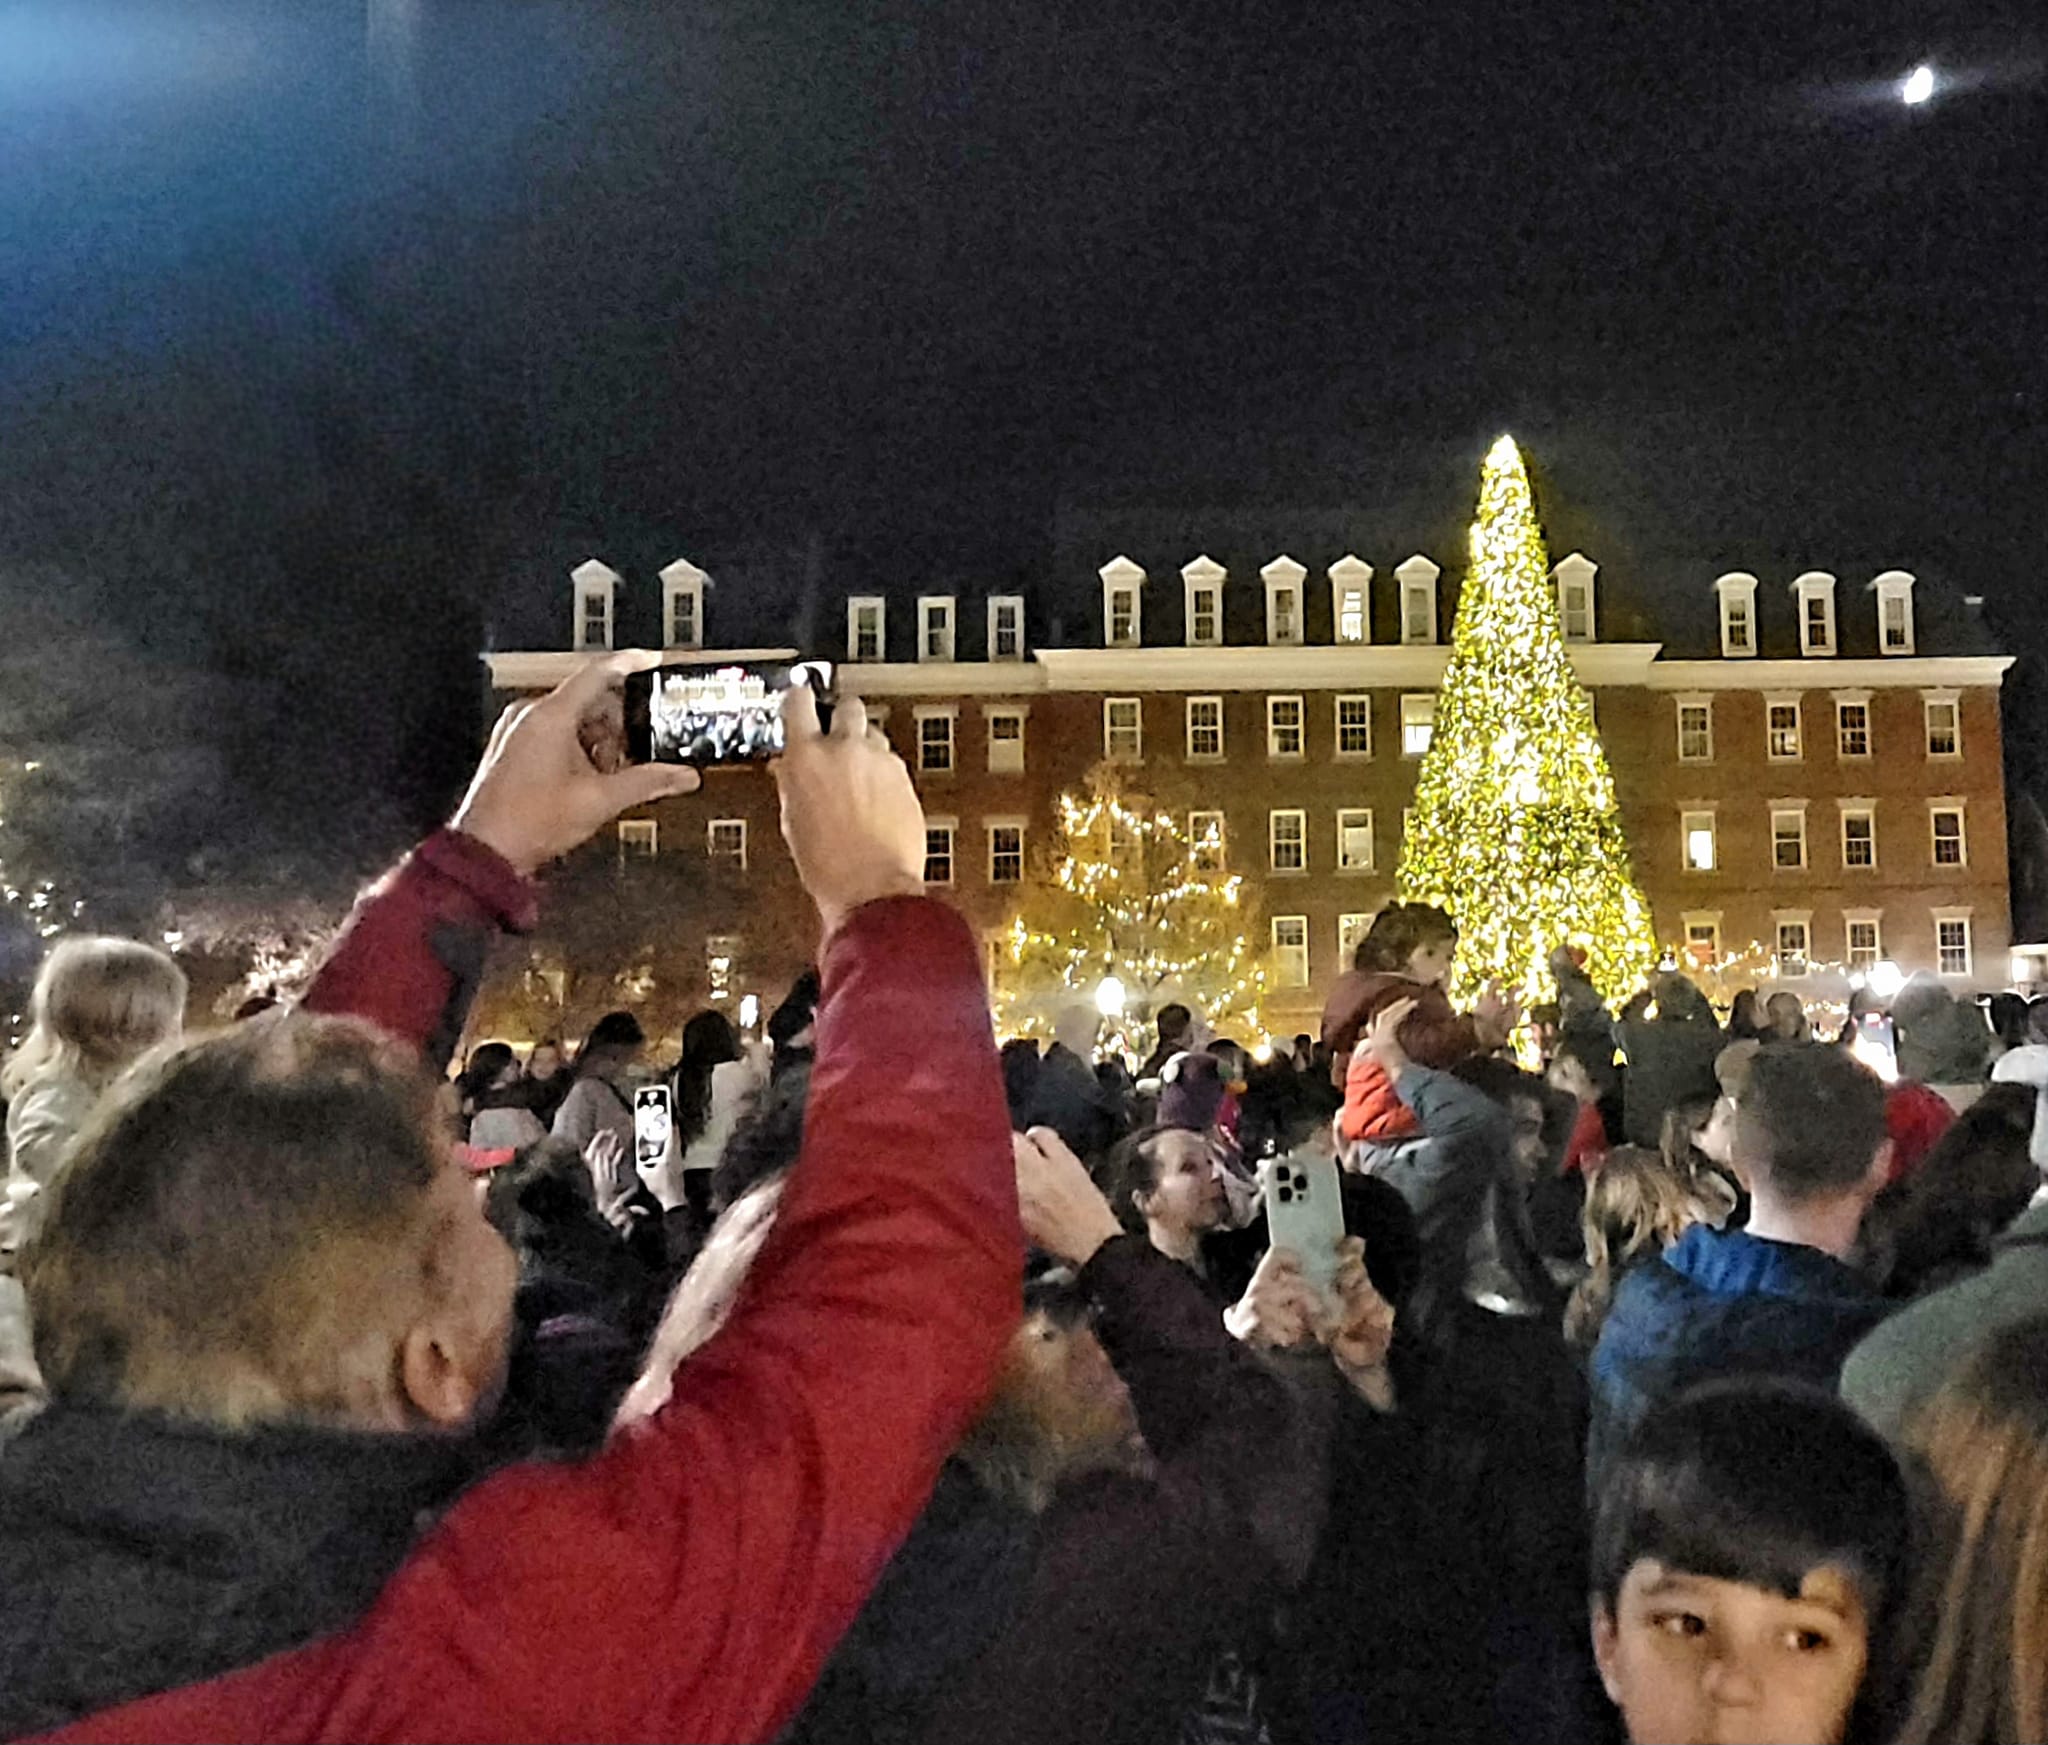 In foreground man is taking a photo at night of a family in front of large Christmas Tree in public square with hundreds of other people around.